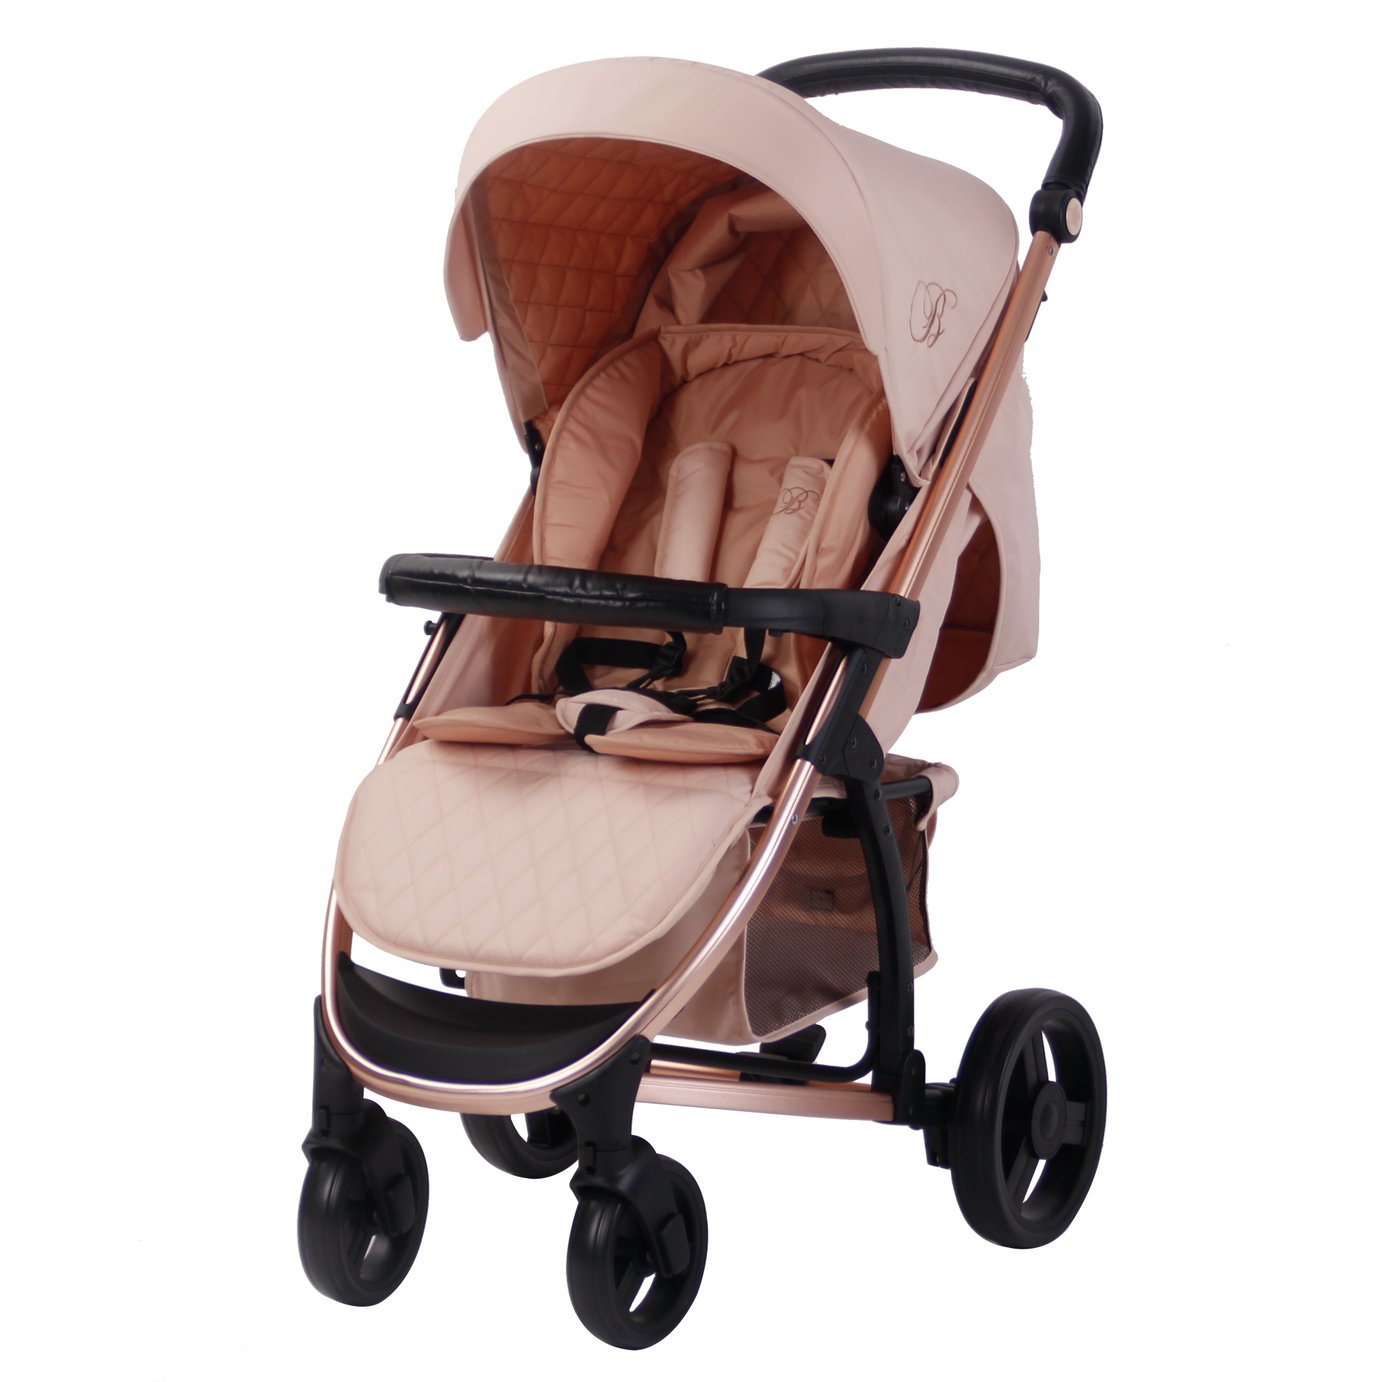 my babiie travel system reviews